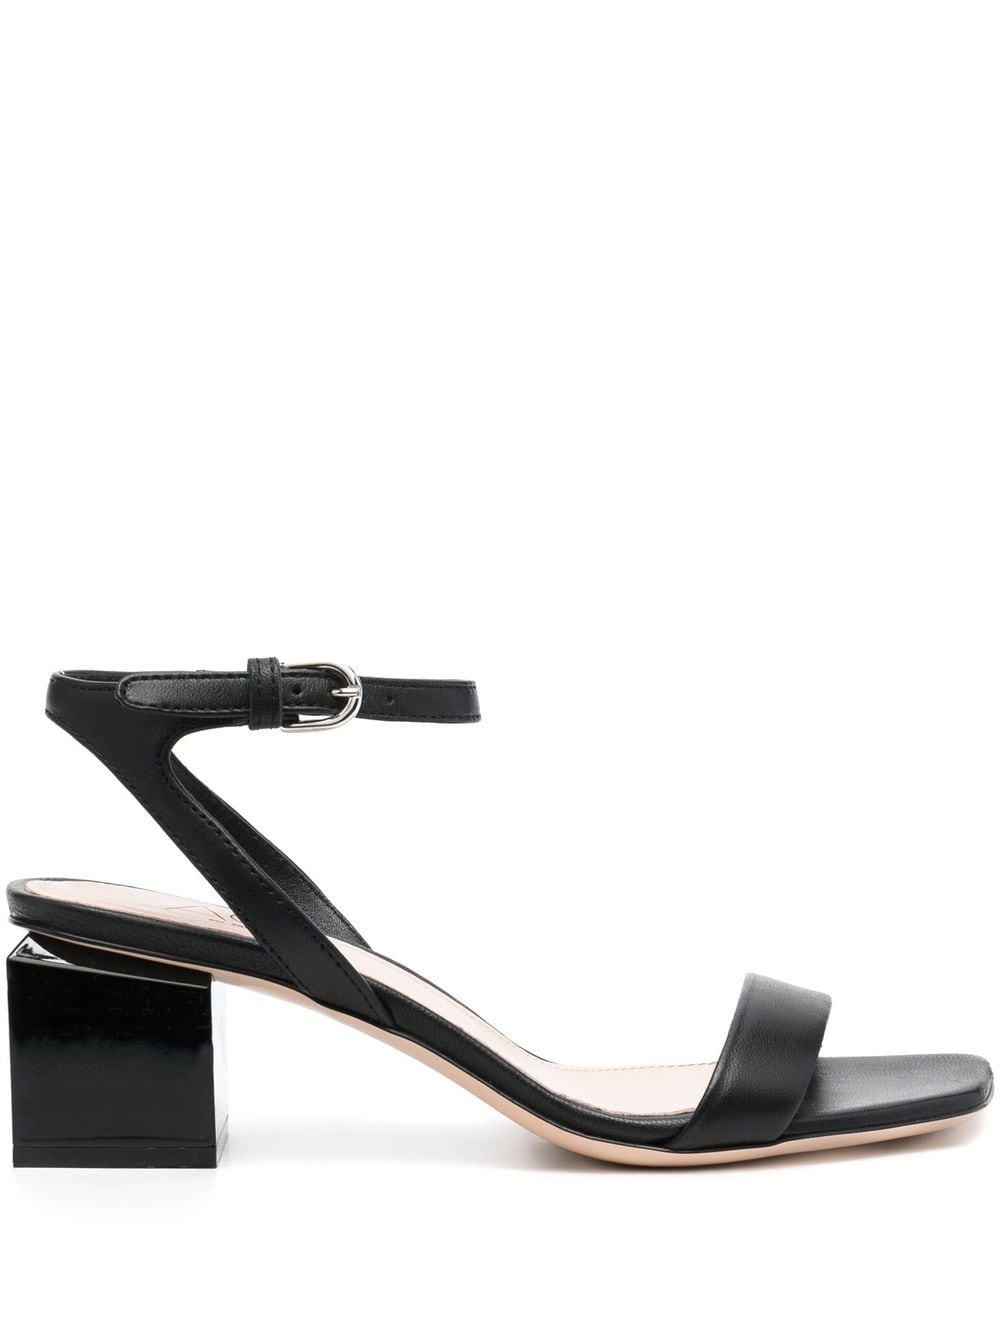 Image 1 of AGL patent-leather sandals